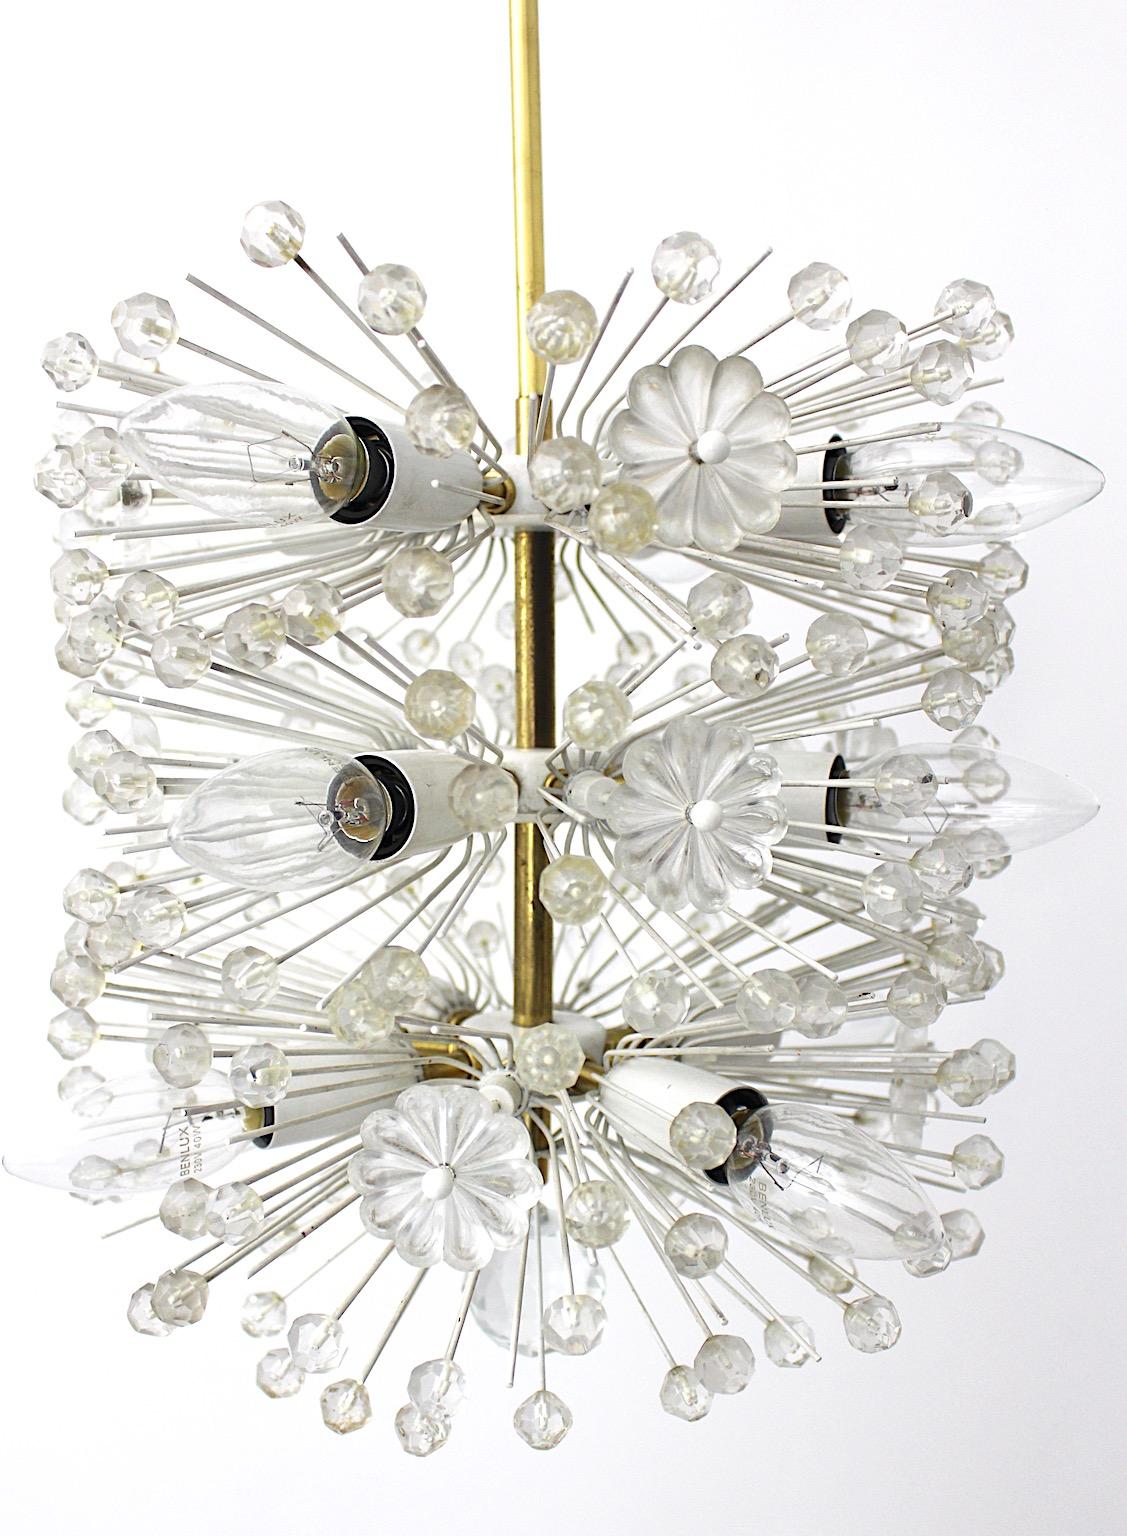 Mid-Century Modern vintage chandelier flower dandelion from white metal and brass designed by Emil Stejnar, circa 1955 and executed by Rupert Nikoll, Vienna.
A fabulous chandelier from brass, acrylic flowers and cut crystal globes dandelion like